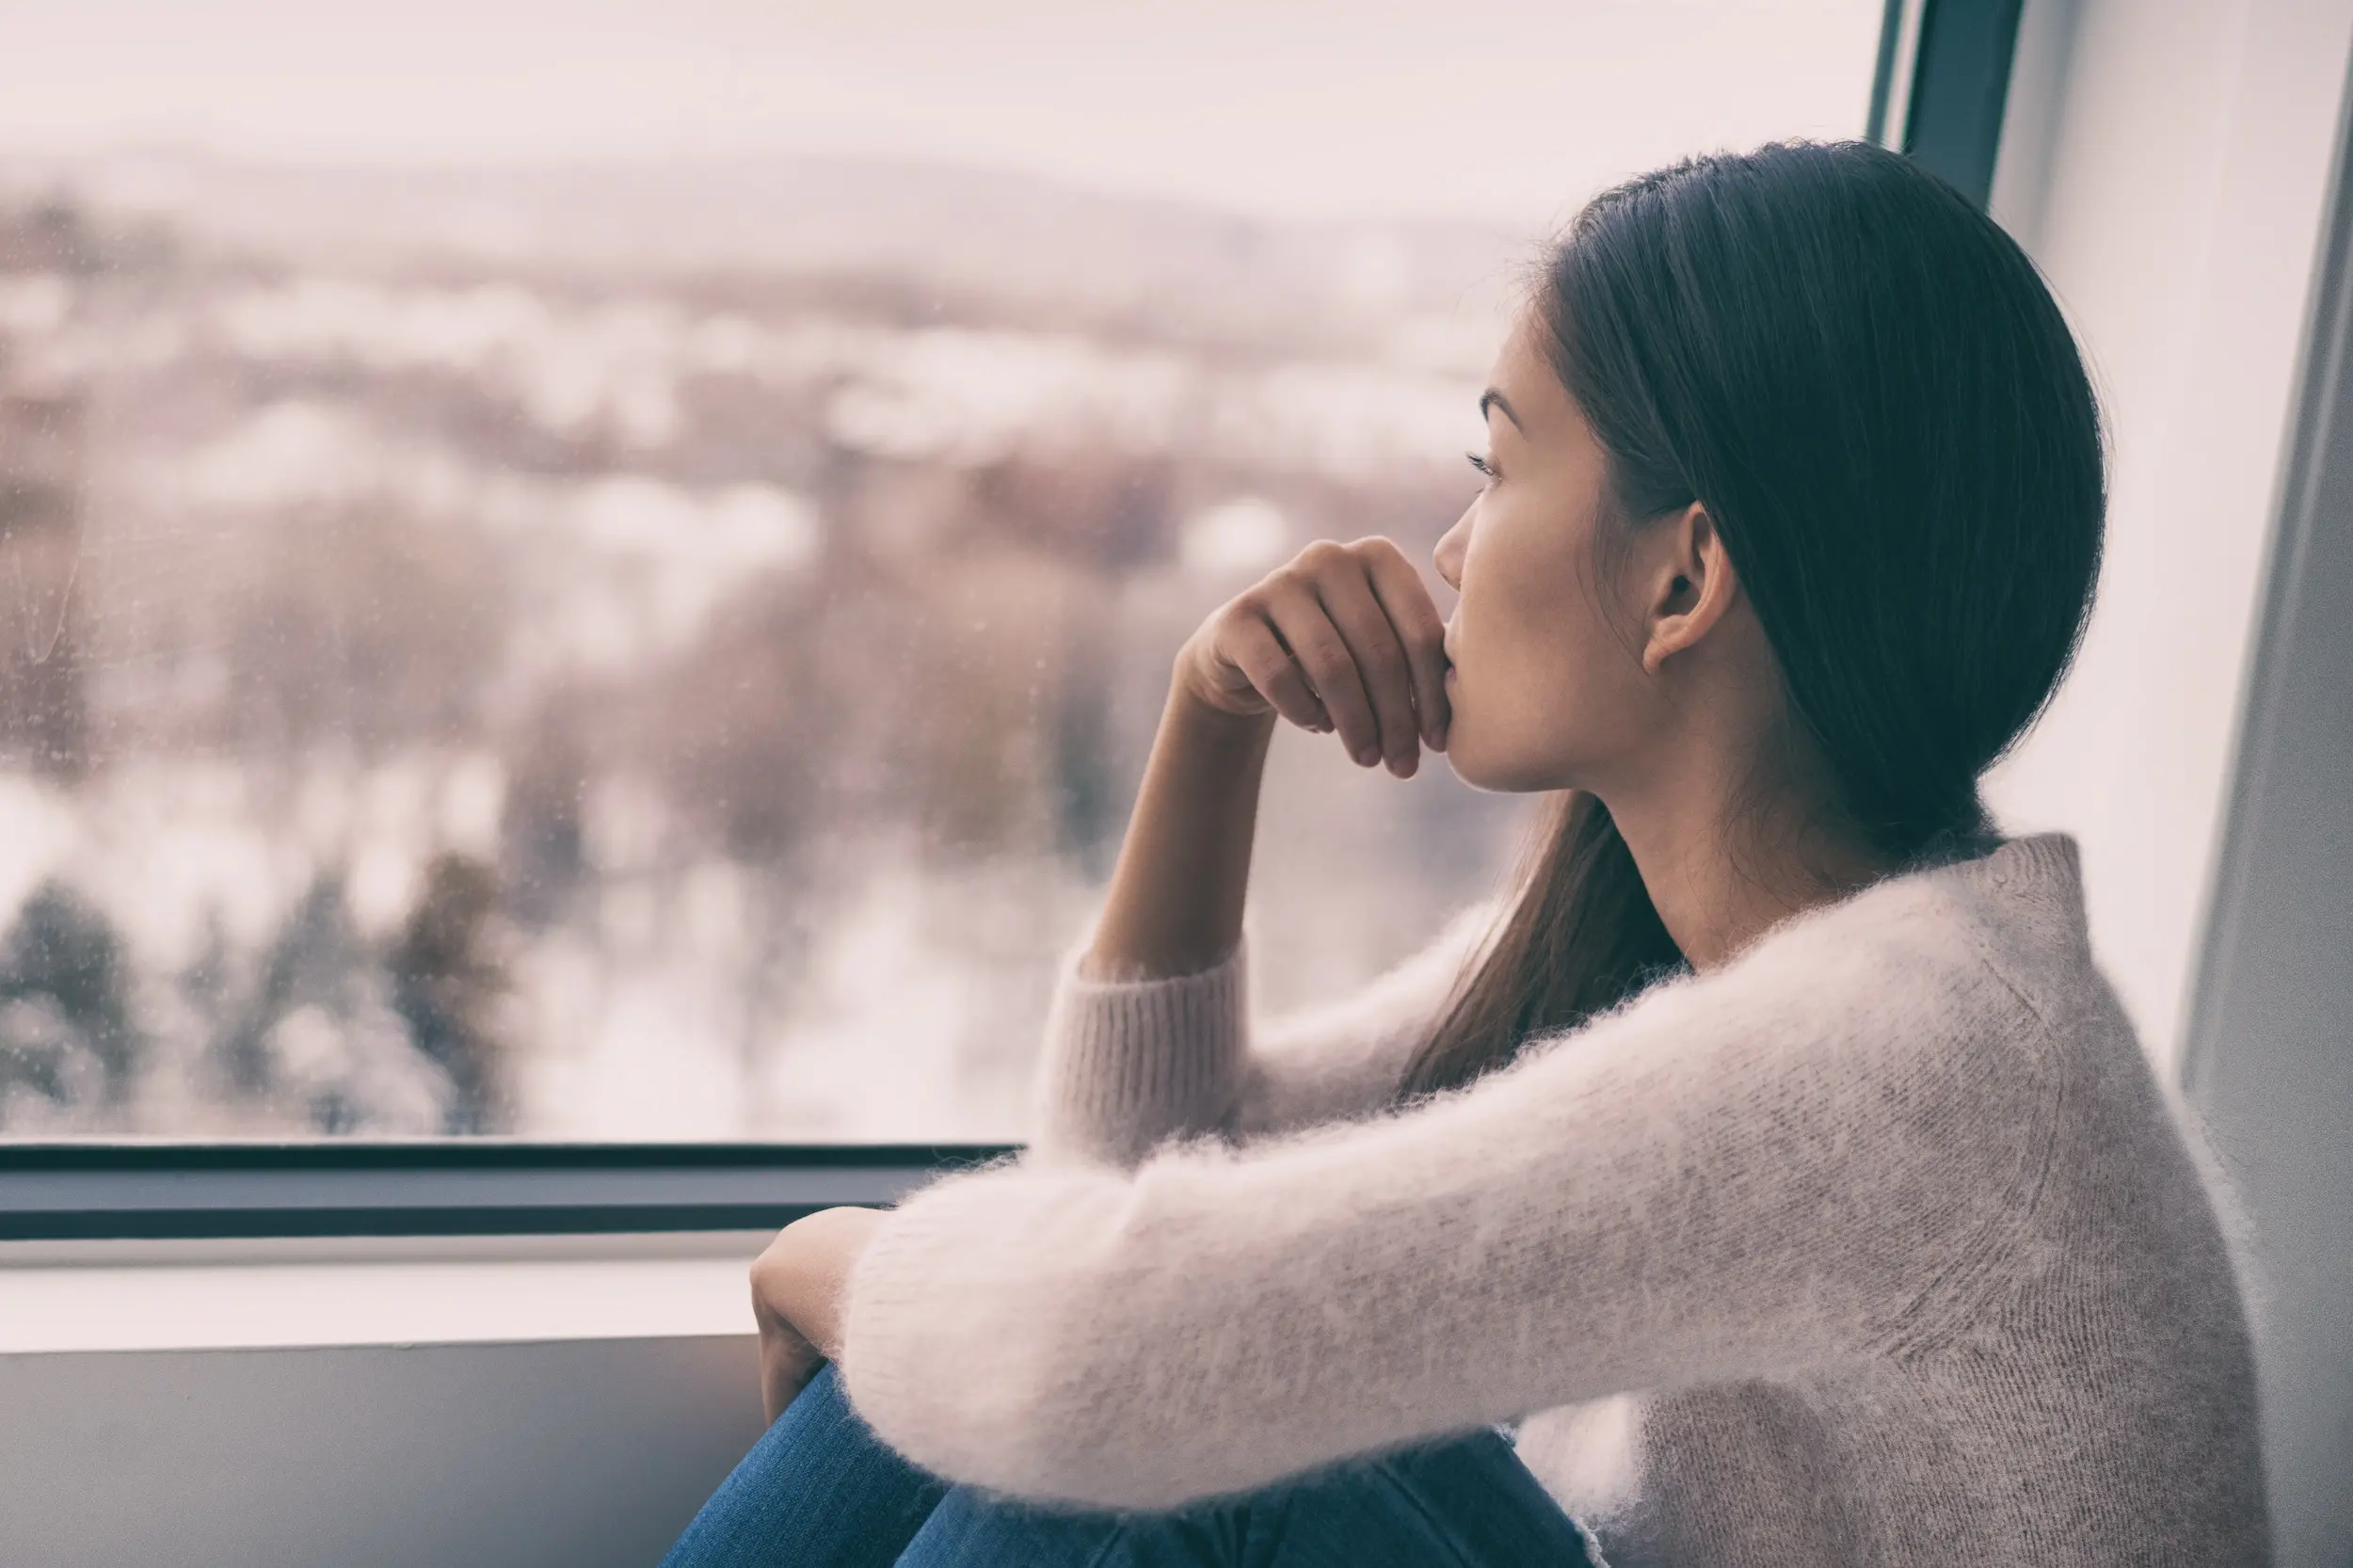 Winter Depression Seasonal Affective Disorder Mental Health Woman Sad Comtemplative Looking Out The Window Alone.